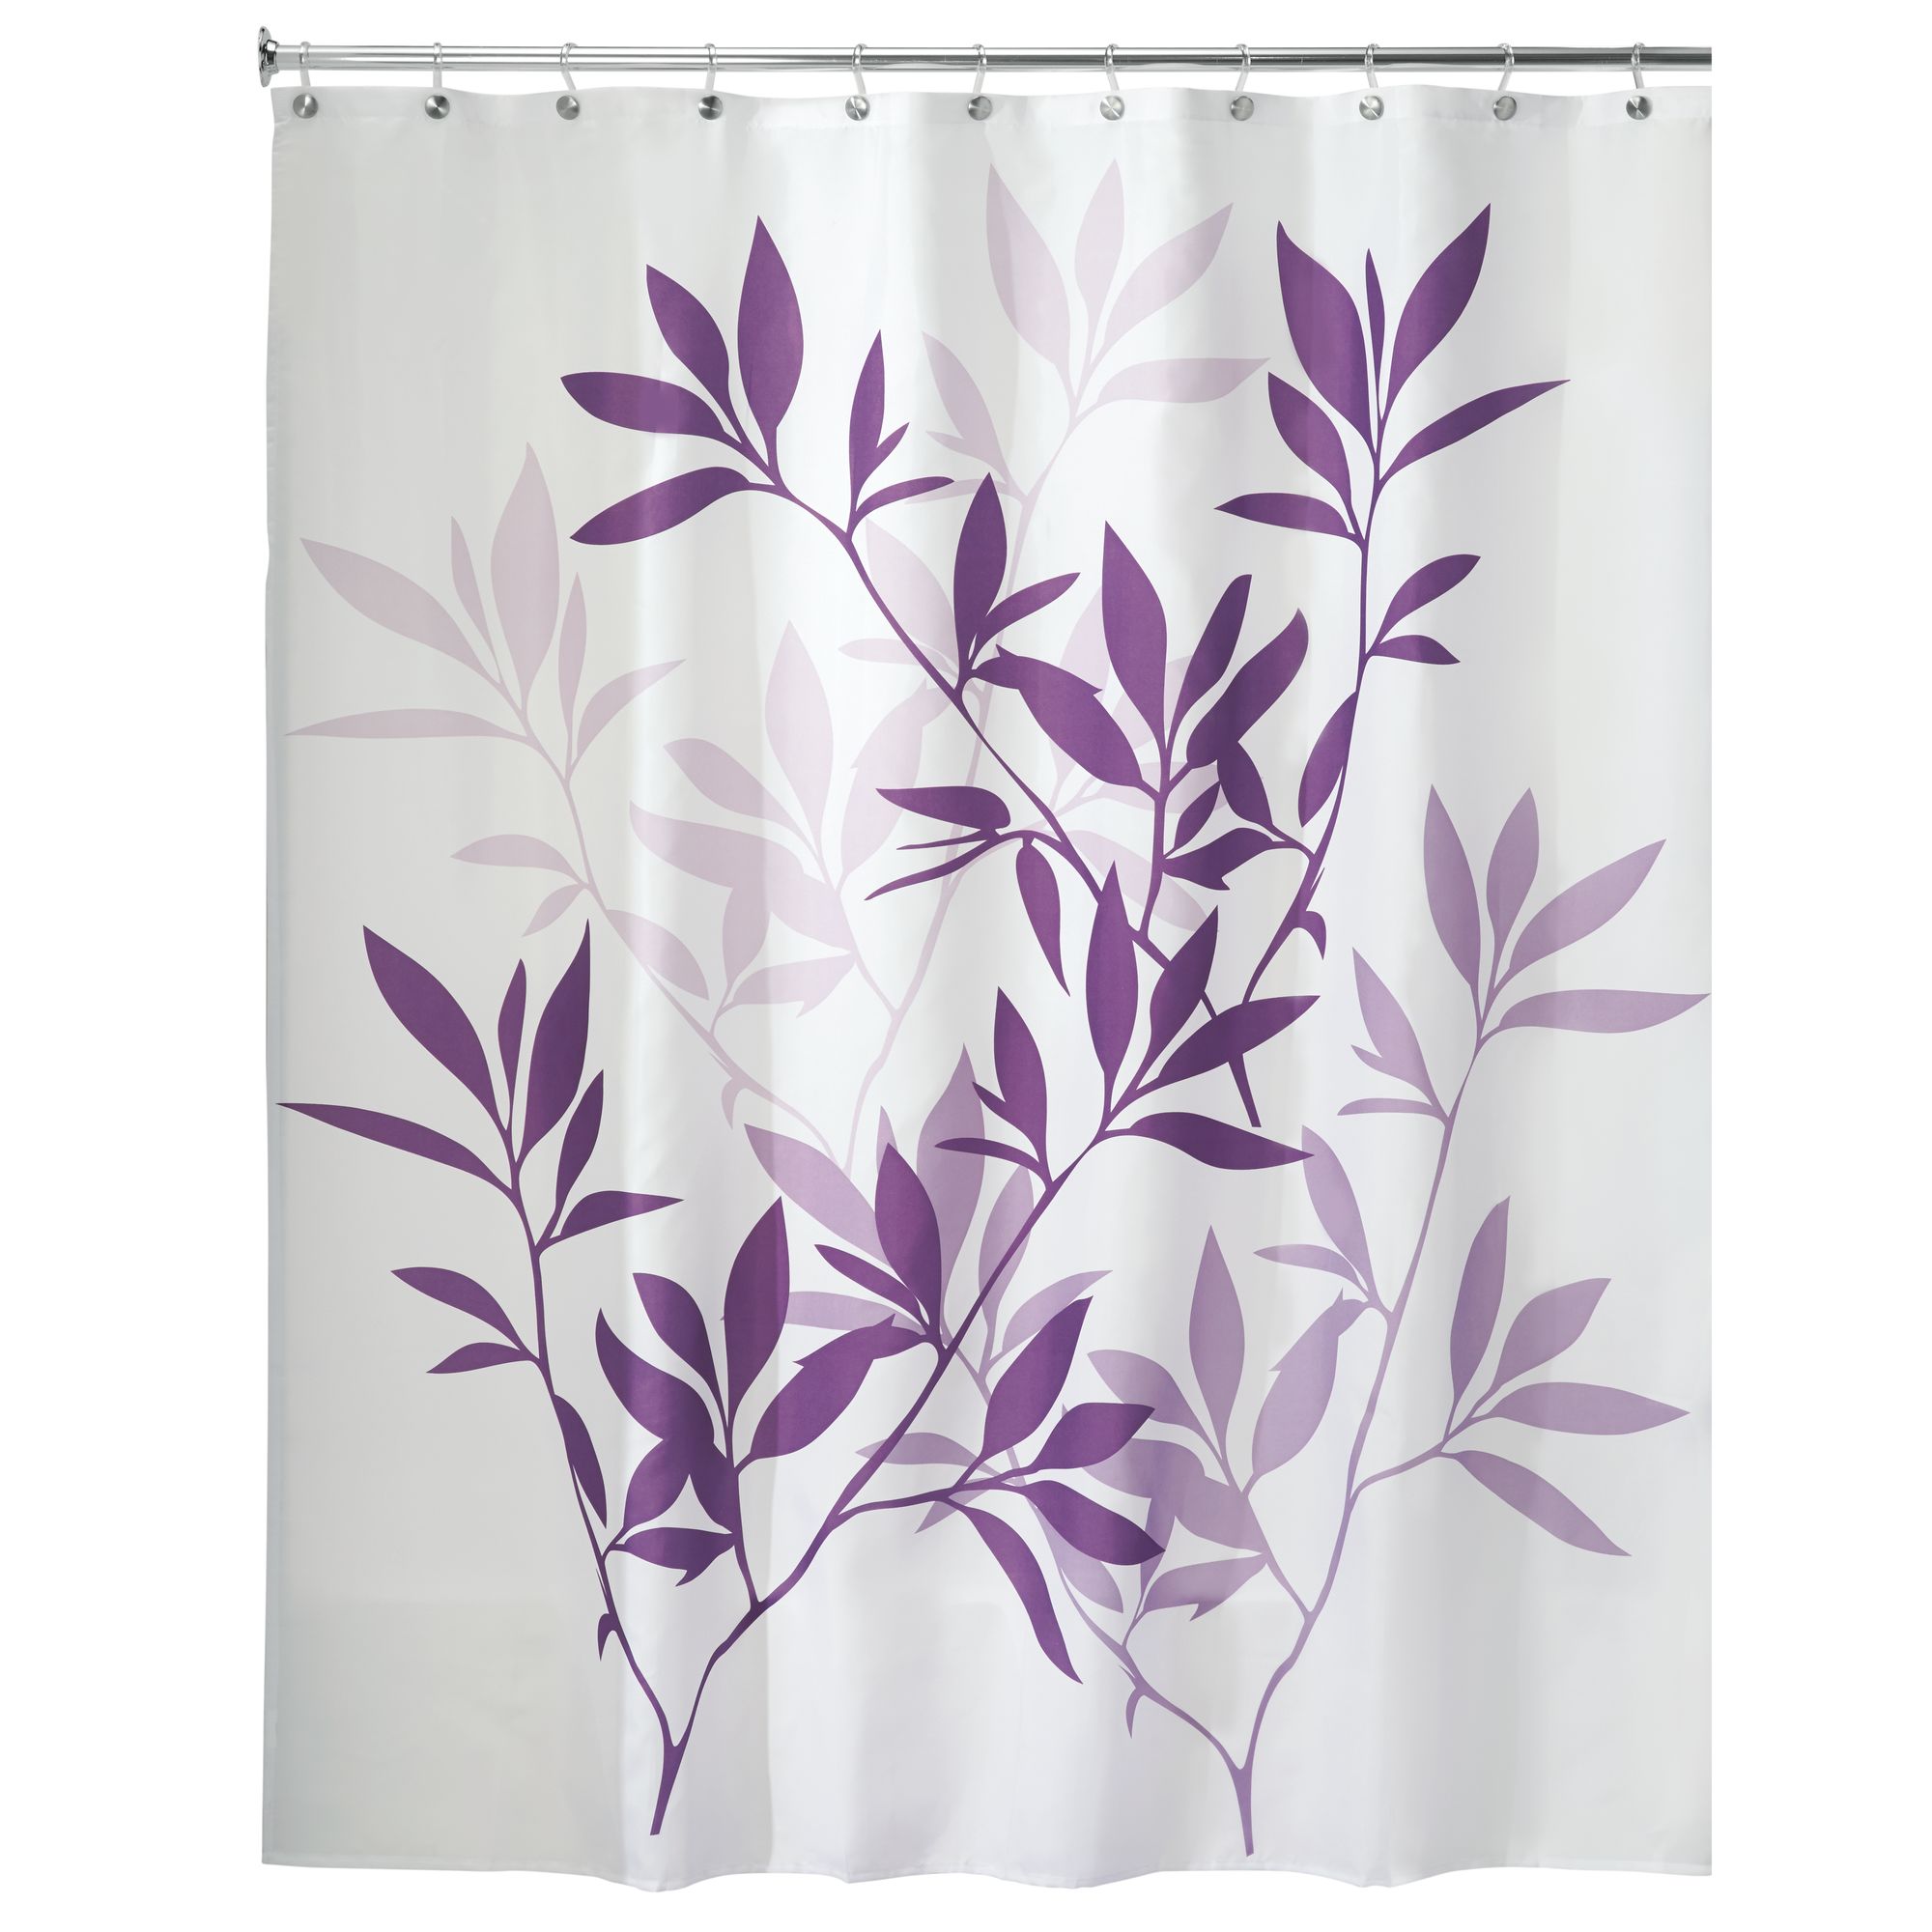 InterDesign Purple Trees Polyester Shower Curtain, 72" x 72" - image 1 of 5